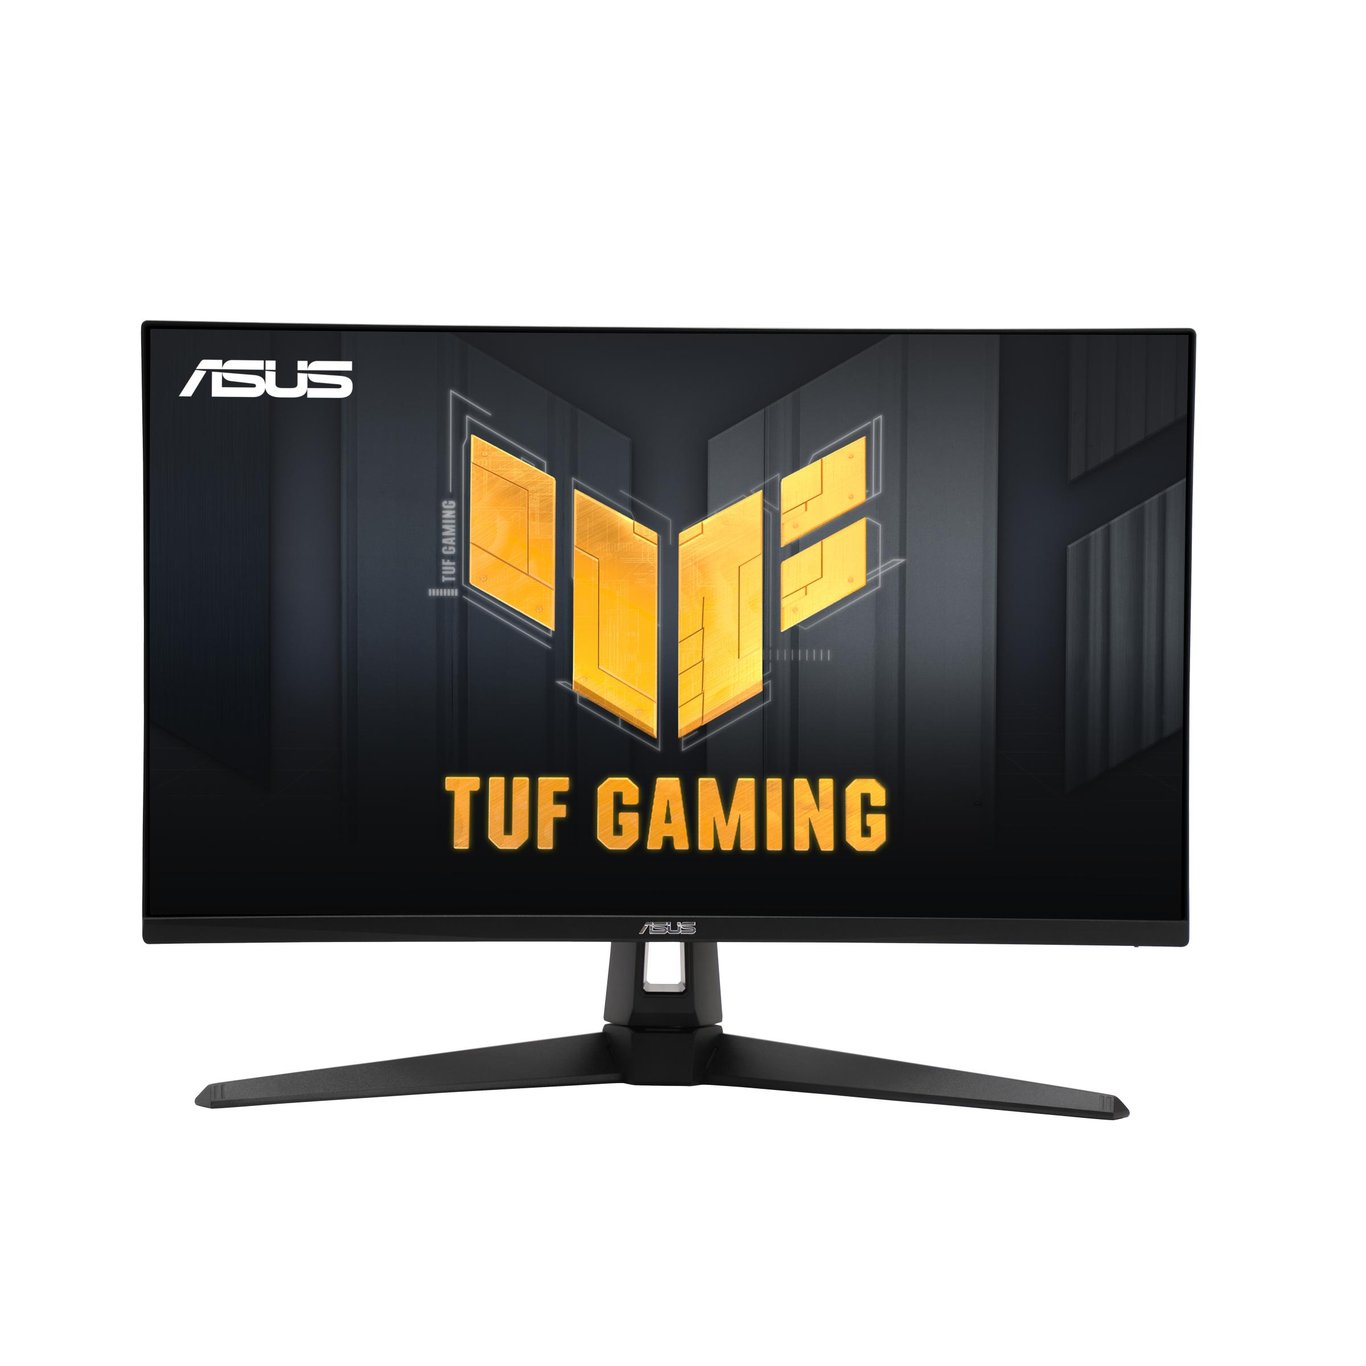 ASUS TUF Gaming VG27AC1A 電競顯示器 (27 吋 WQHD 170Hz IPS HDR G-Sync Compatible) - 2560 x 1440